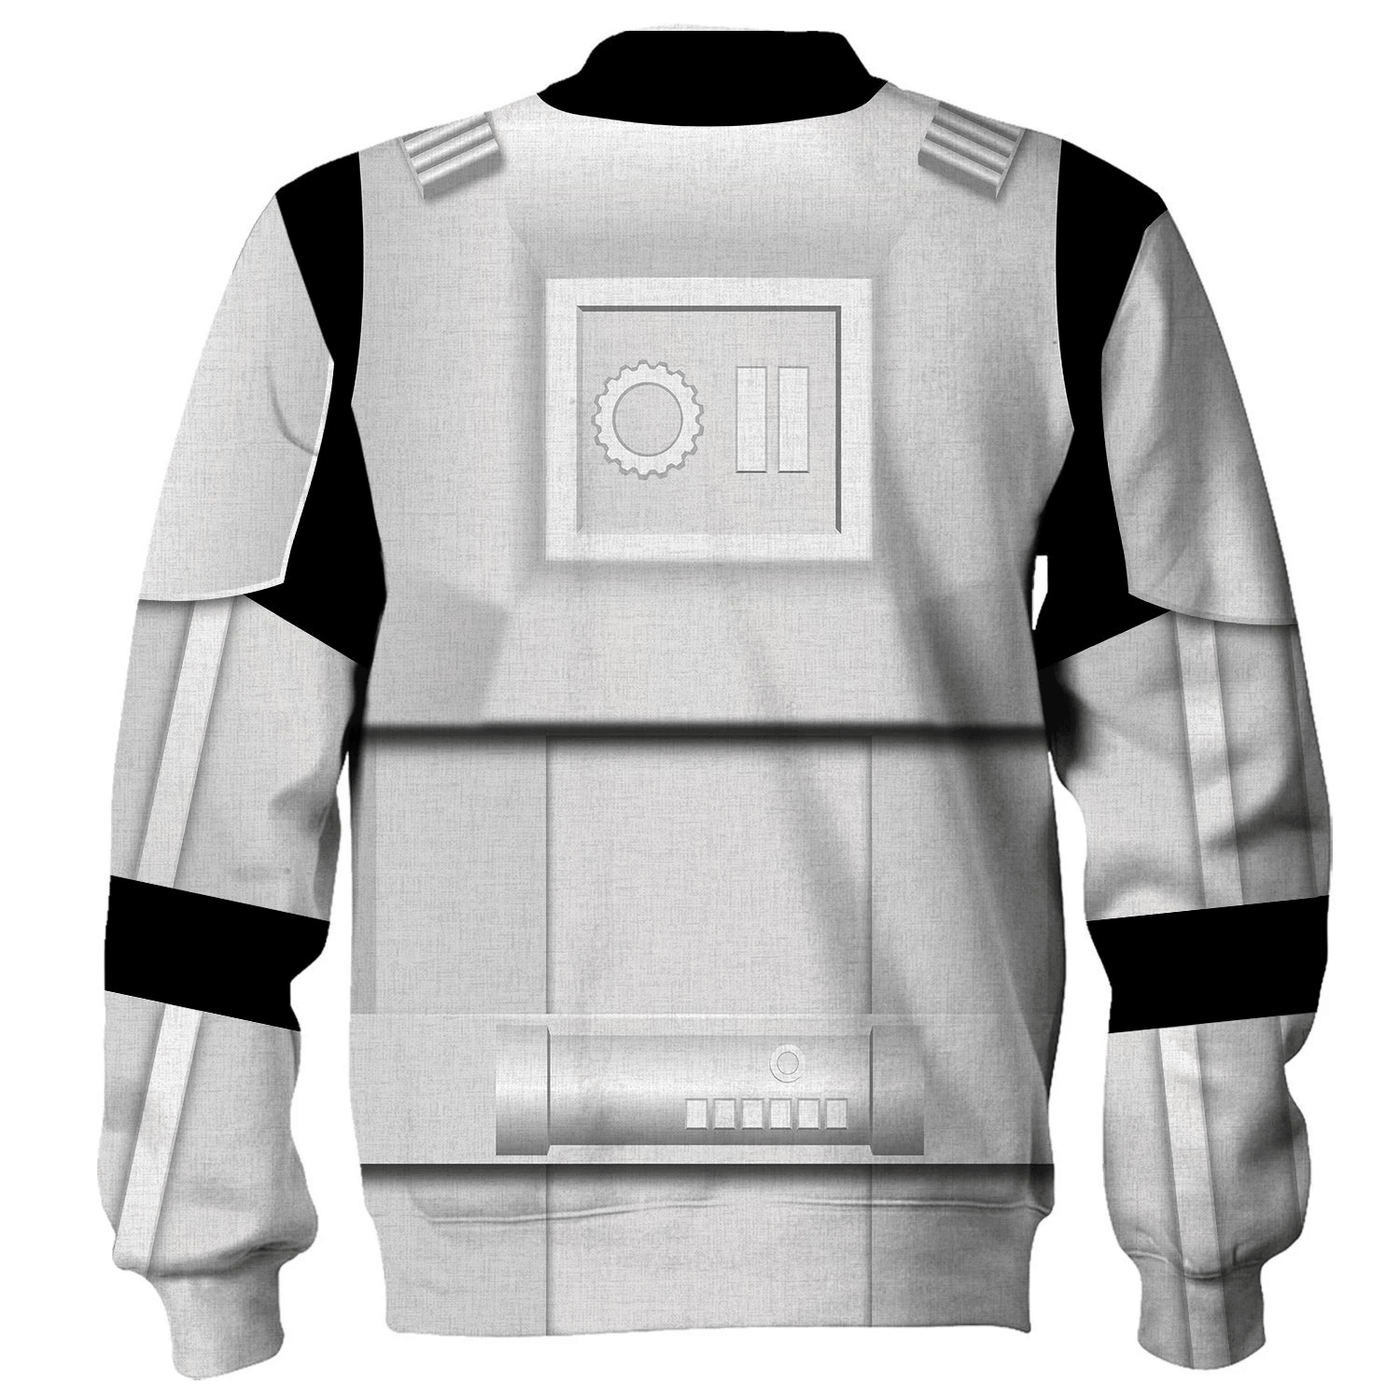 Star Wars Stormtrooper 2 Costume - Sweater - Ugly Christmas Sweater